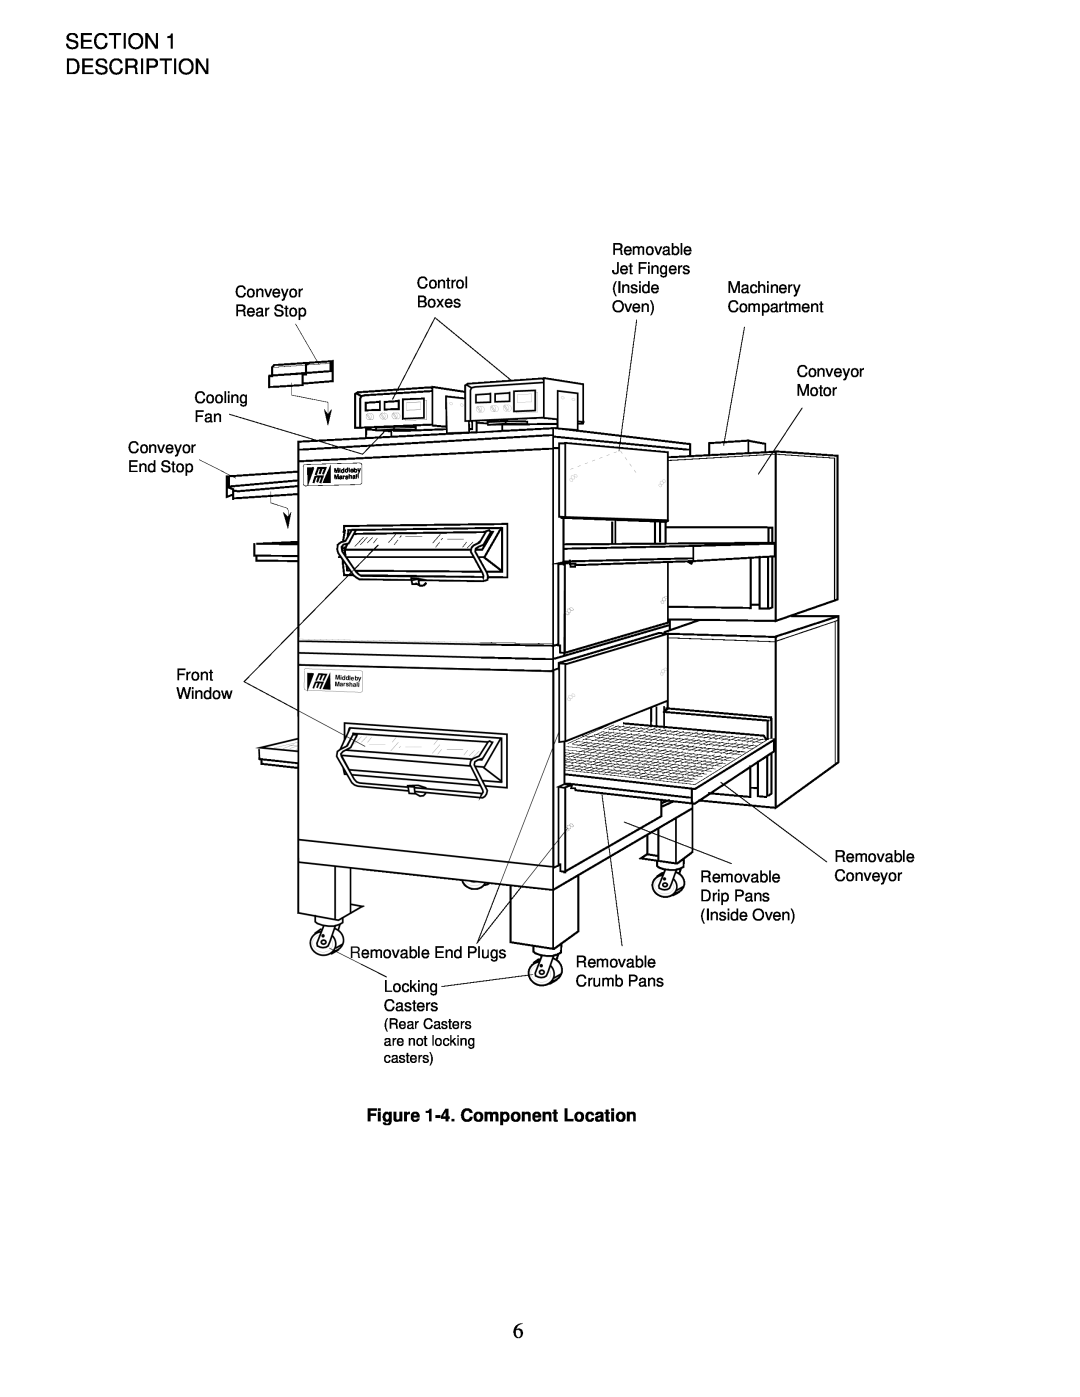 Middleby Cooking Systems Group PS200-R68 manual 4. Component Location, Section Description 